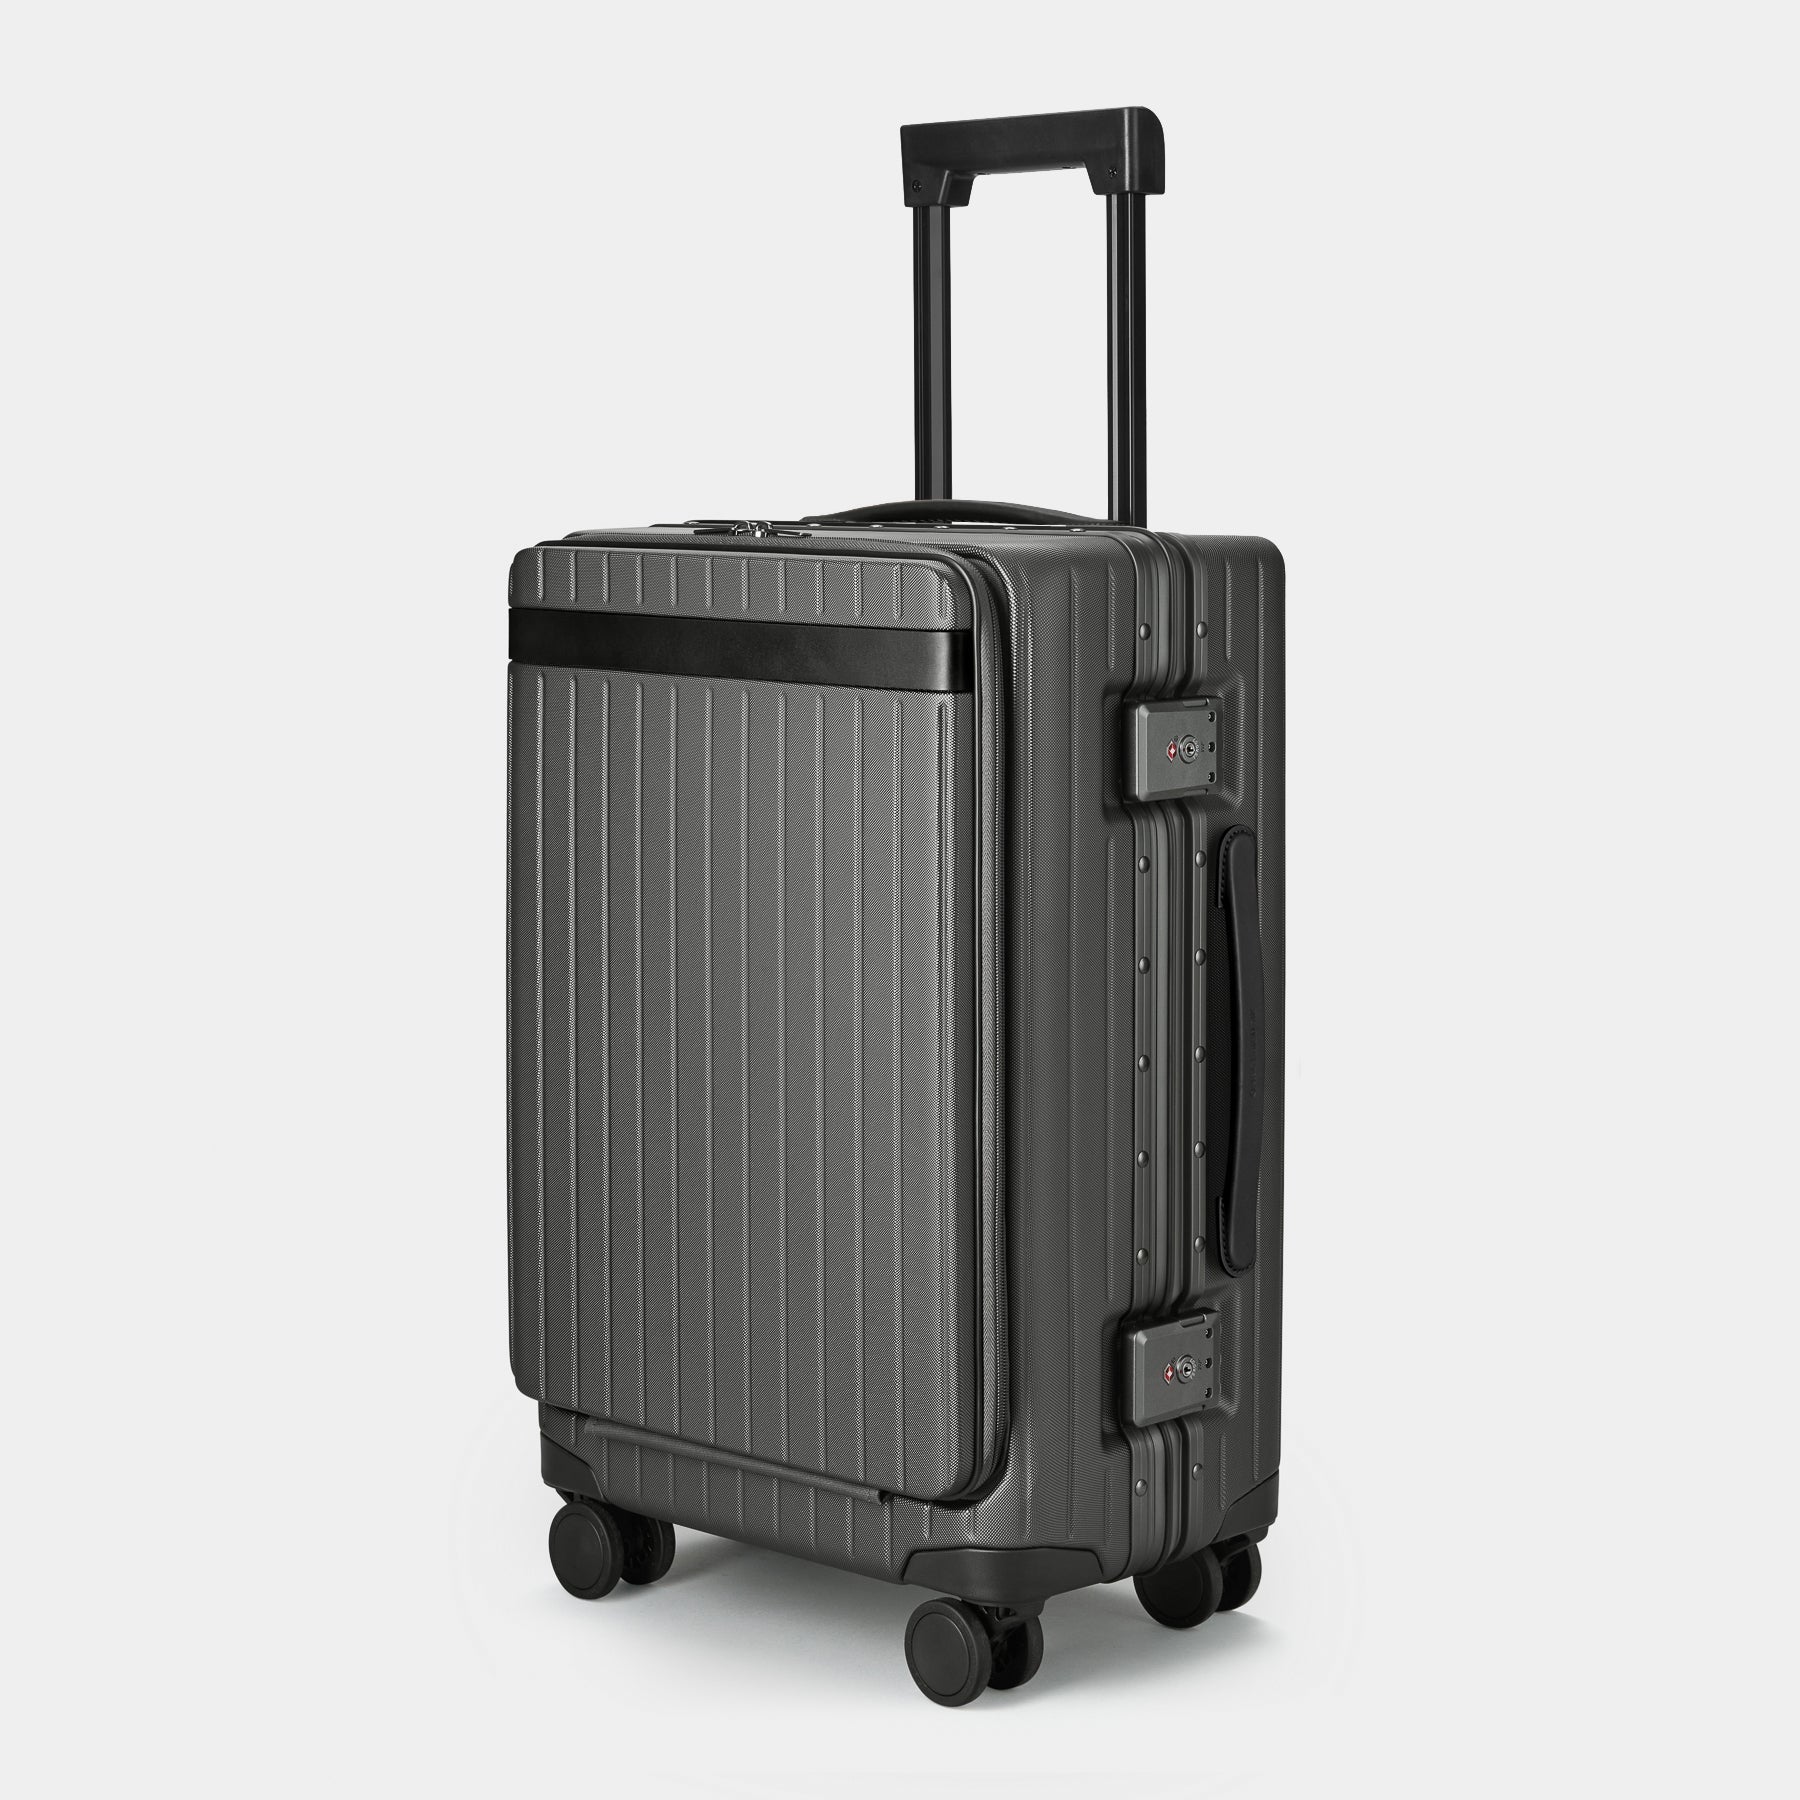 The Carry-on Pro - Return Black Polycarbonate carry-on suitcase - Good Condition